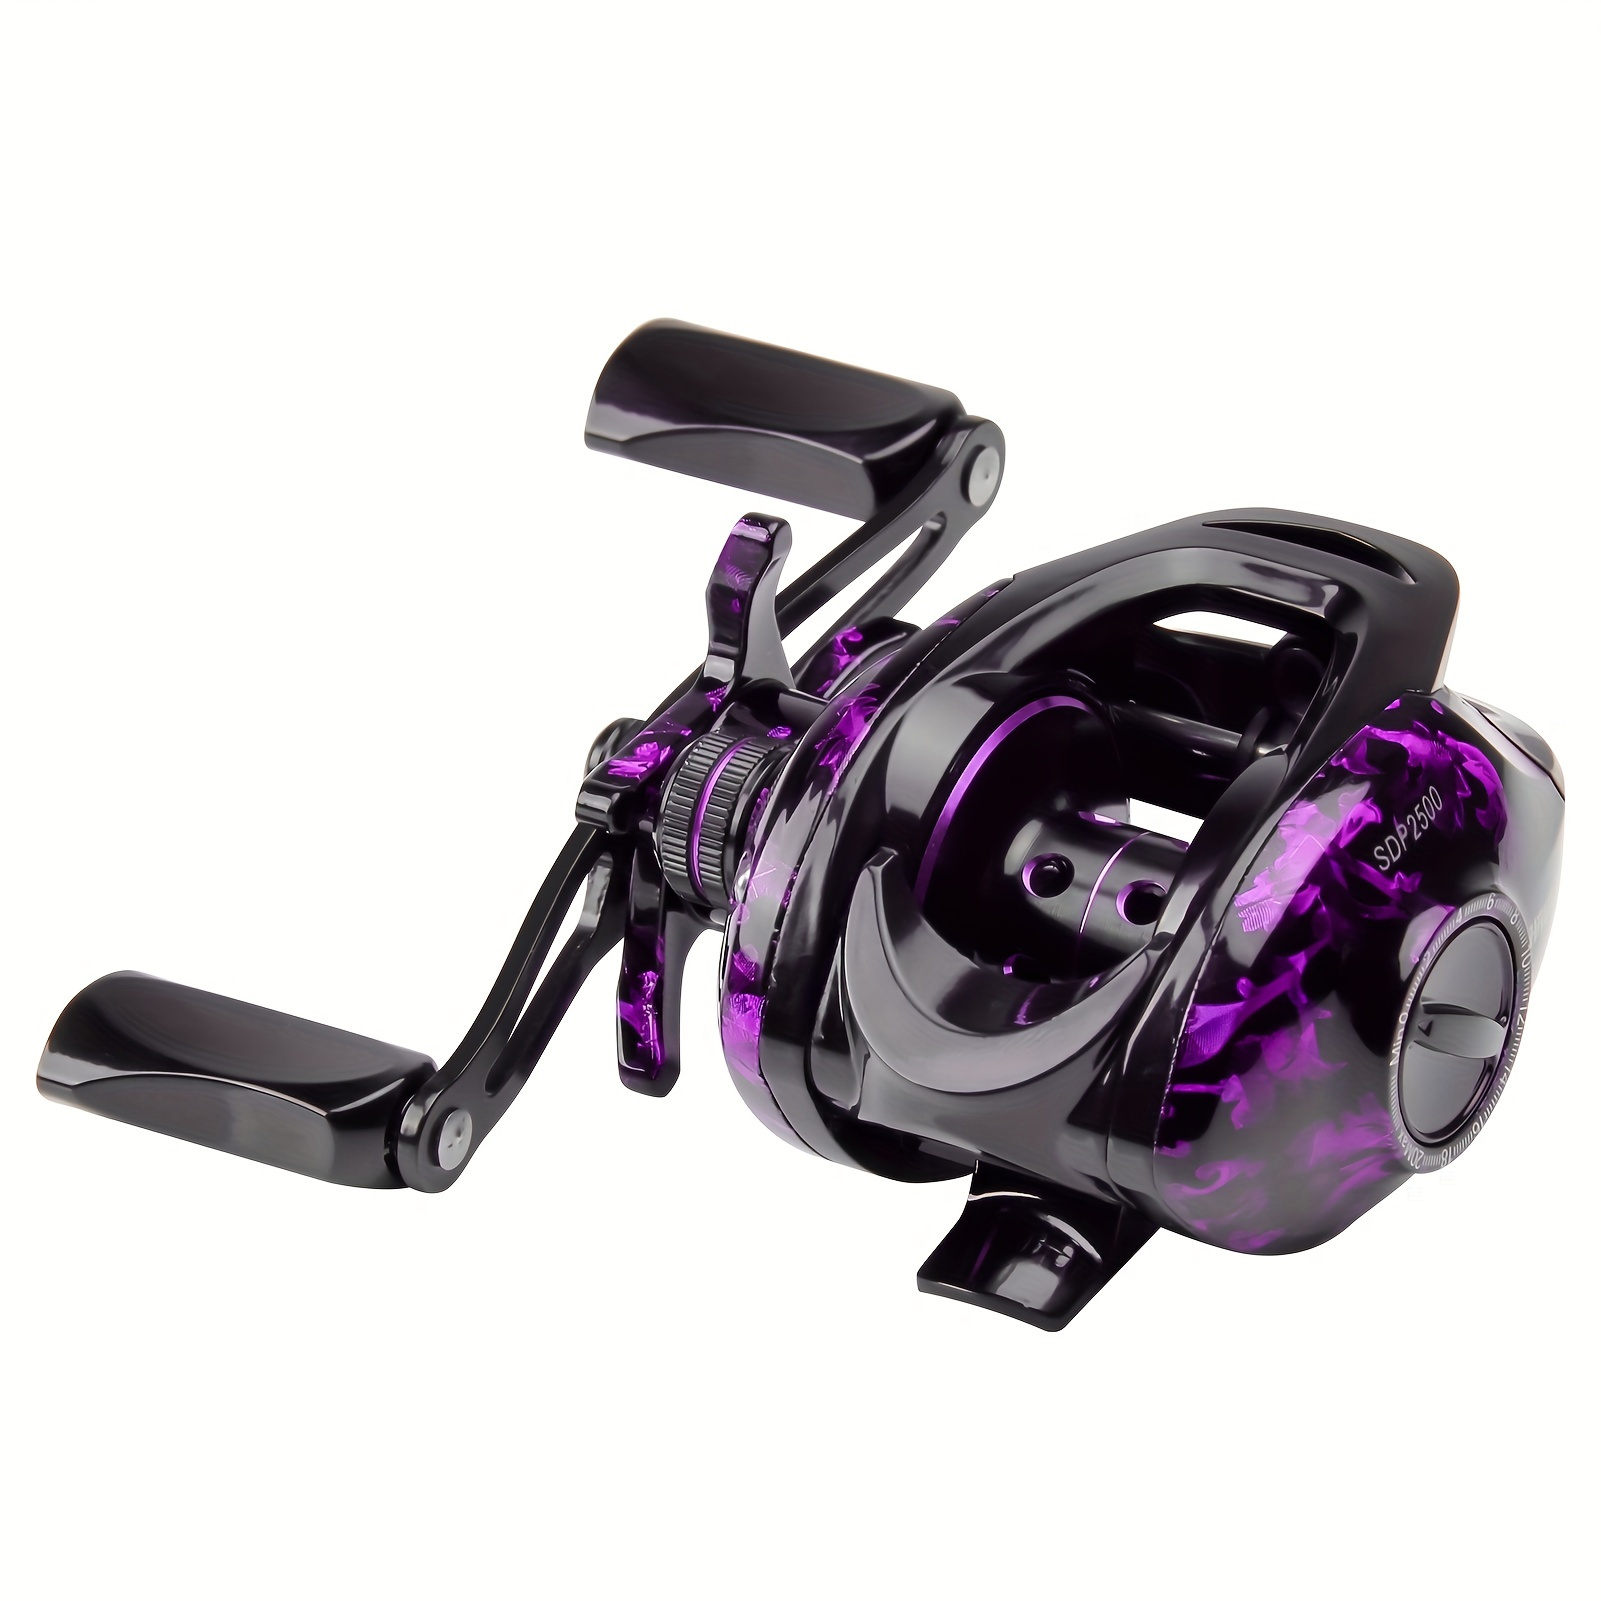 Sougayilang Baitcasting Reels High Speed Fishing Reel with 9+1 Ball  Bearings, Gear Ratio 8.0:1, Centrifugal Brakes Power Handle Casting Reels